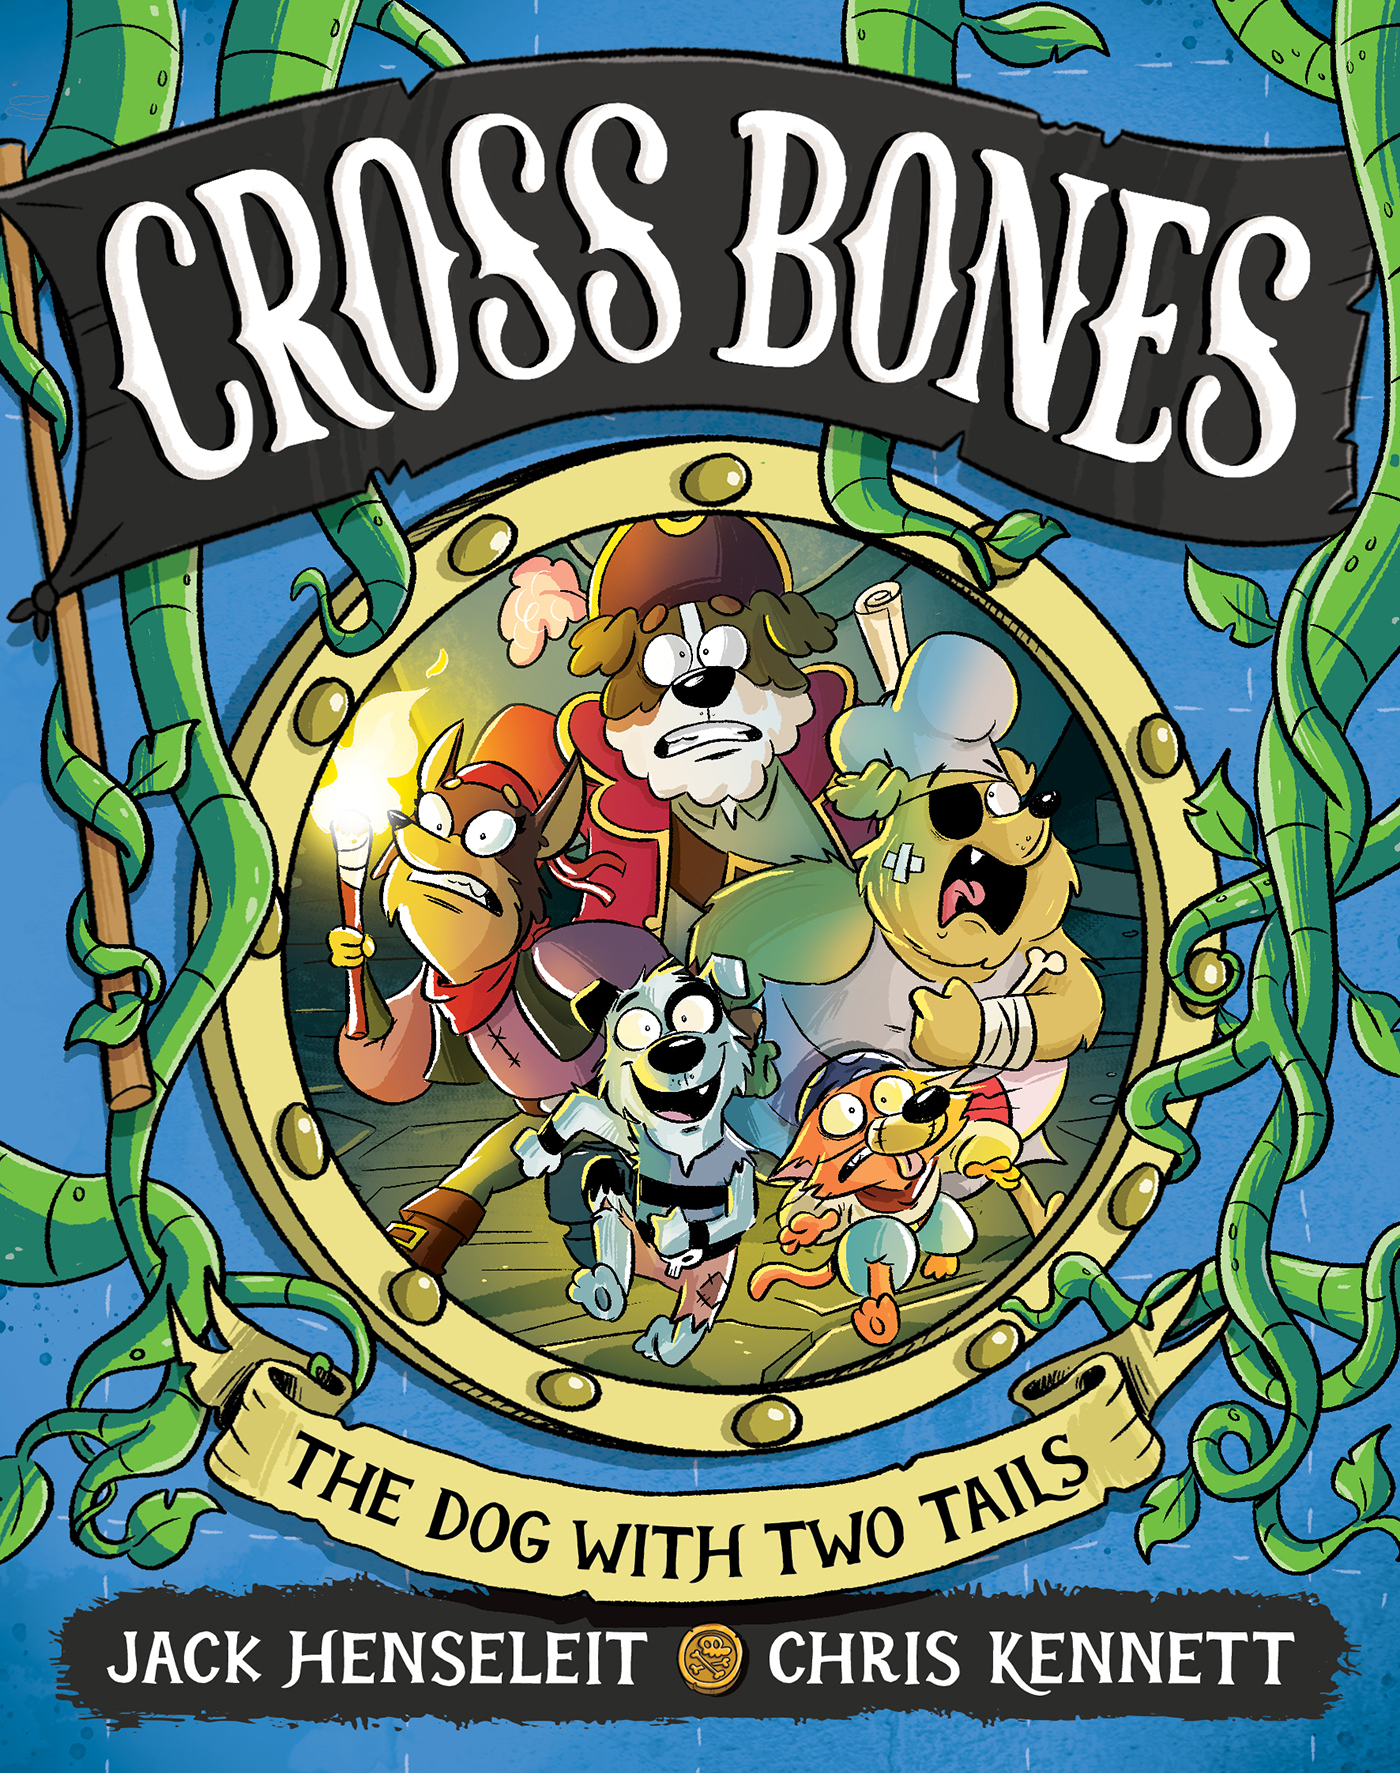 Cross Bones: The Dog With Two Tails